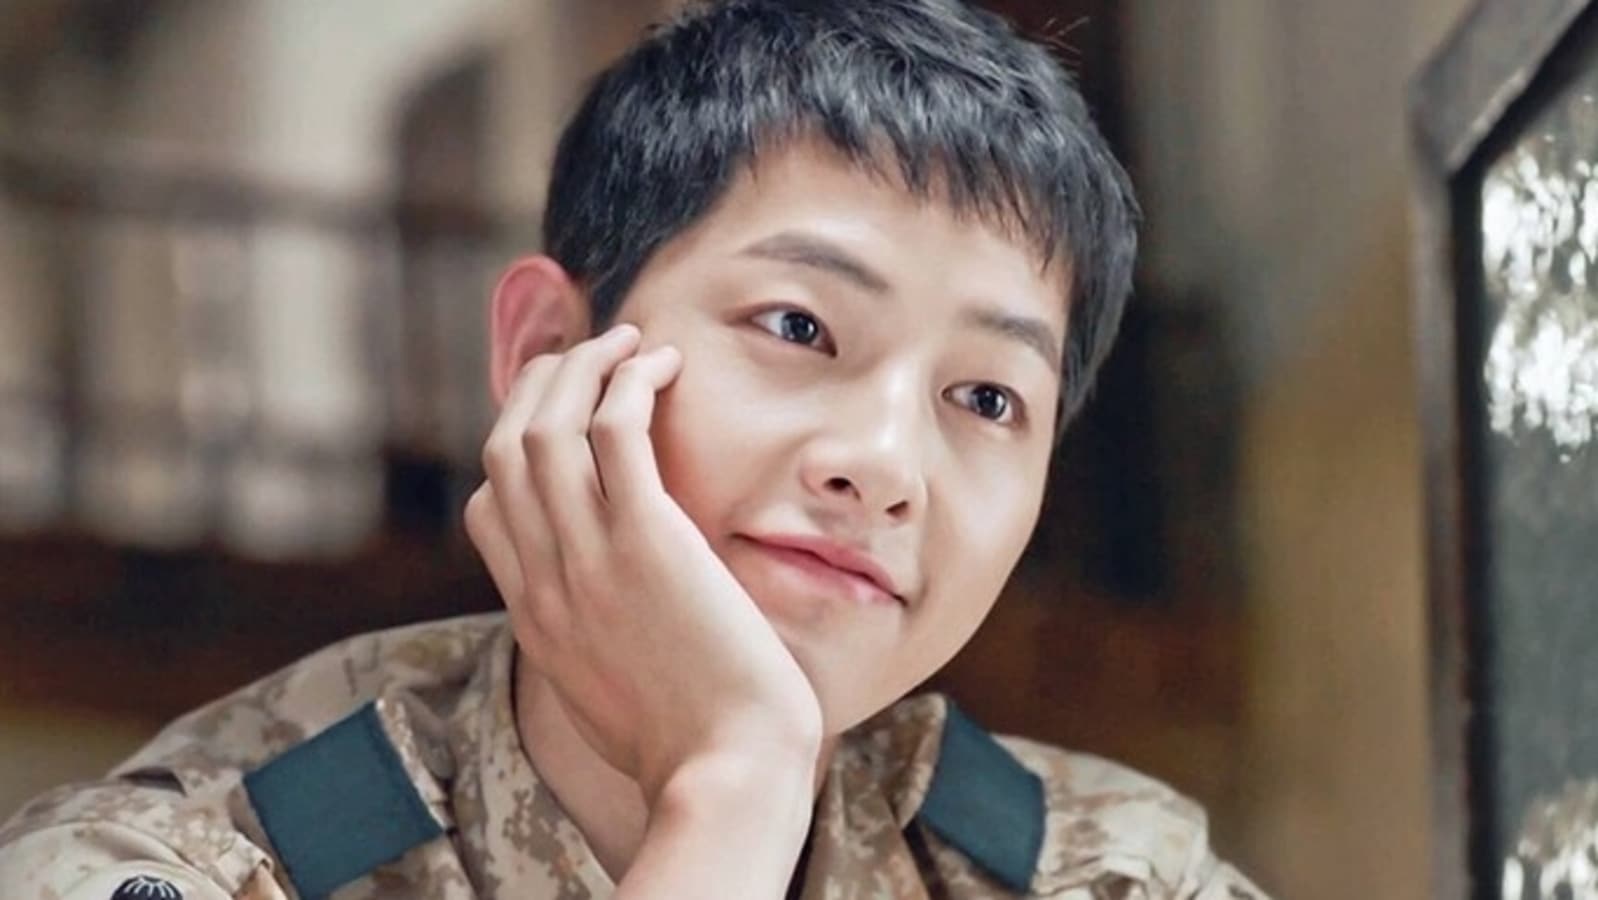 Song Joong-ki confirmed to be dating British woman – they were introduced a  year ago and have 'a good relationship